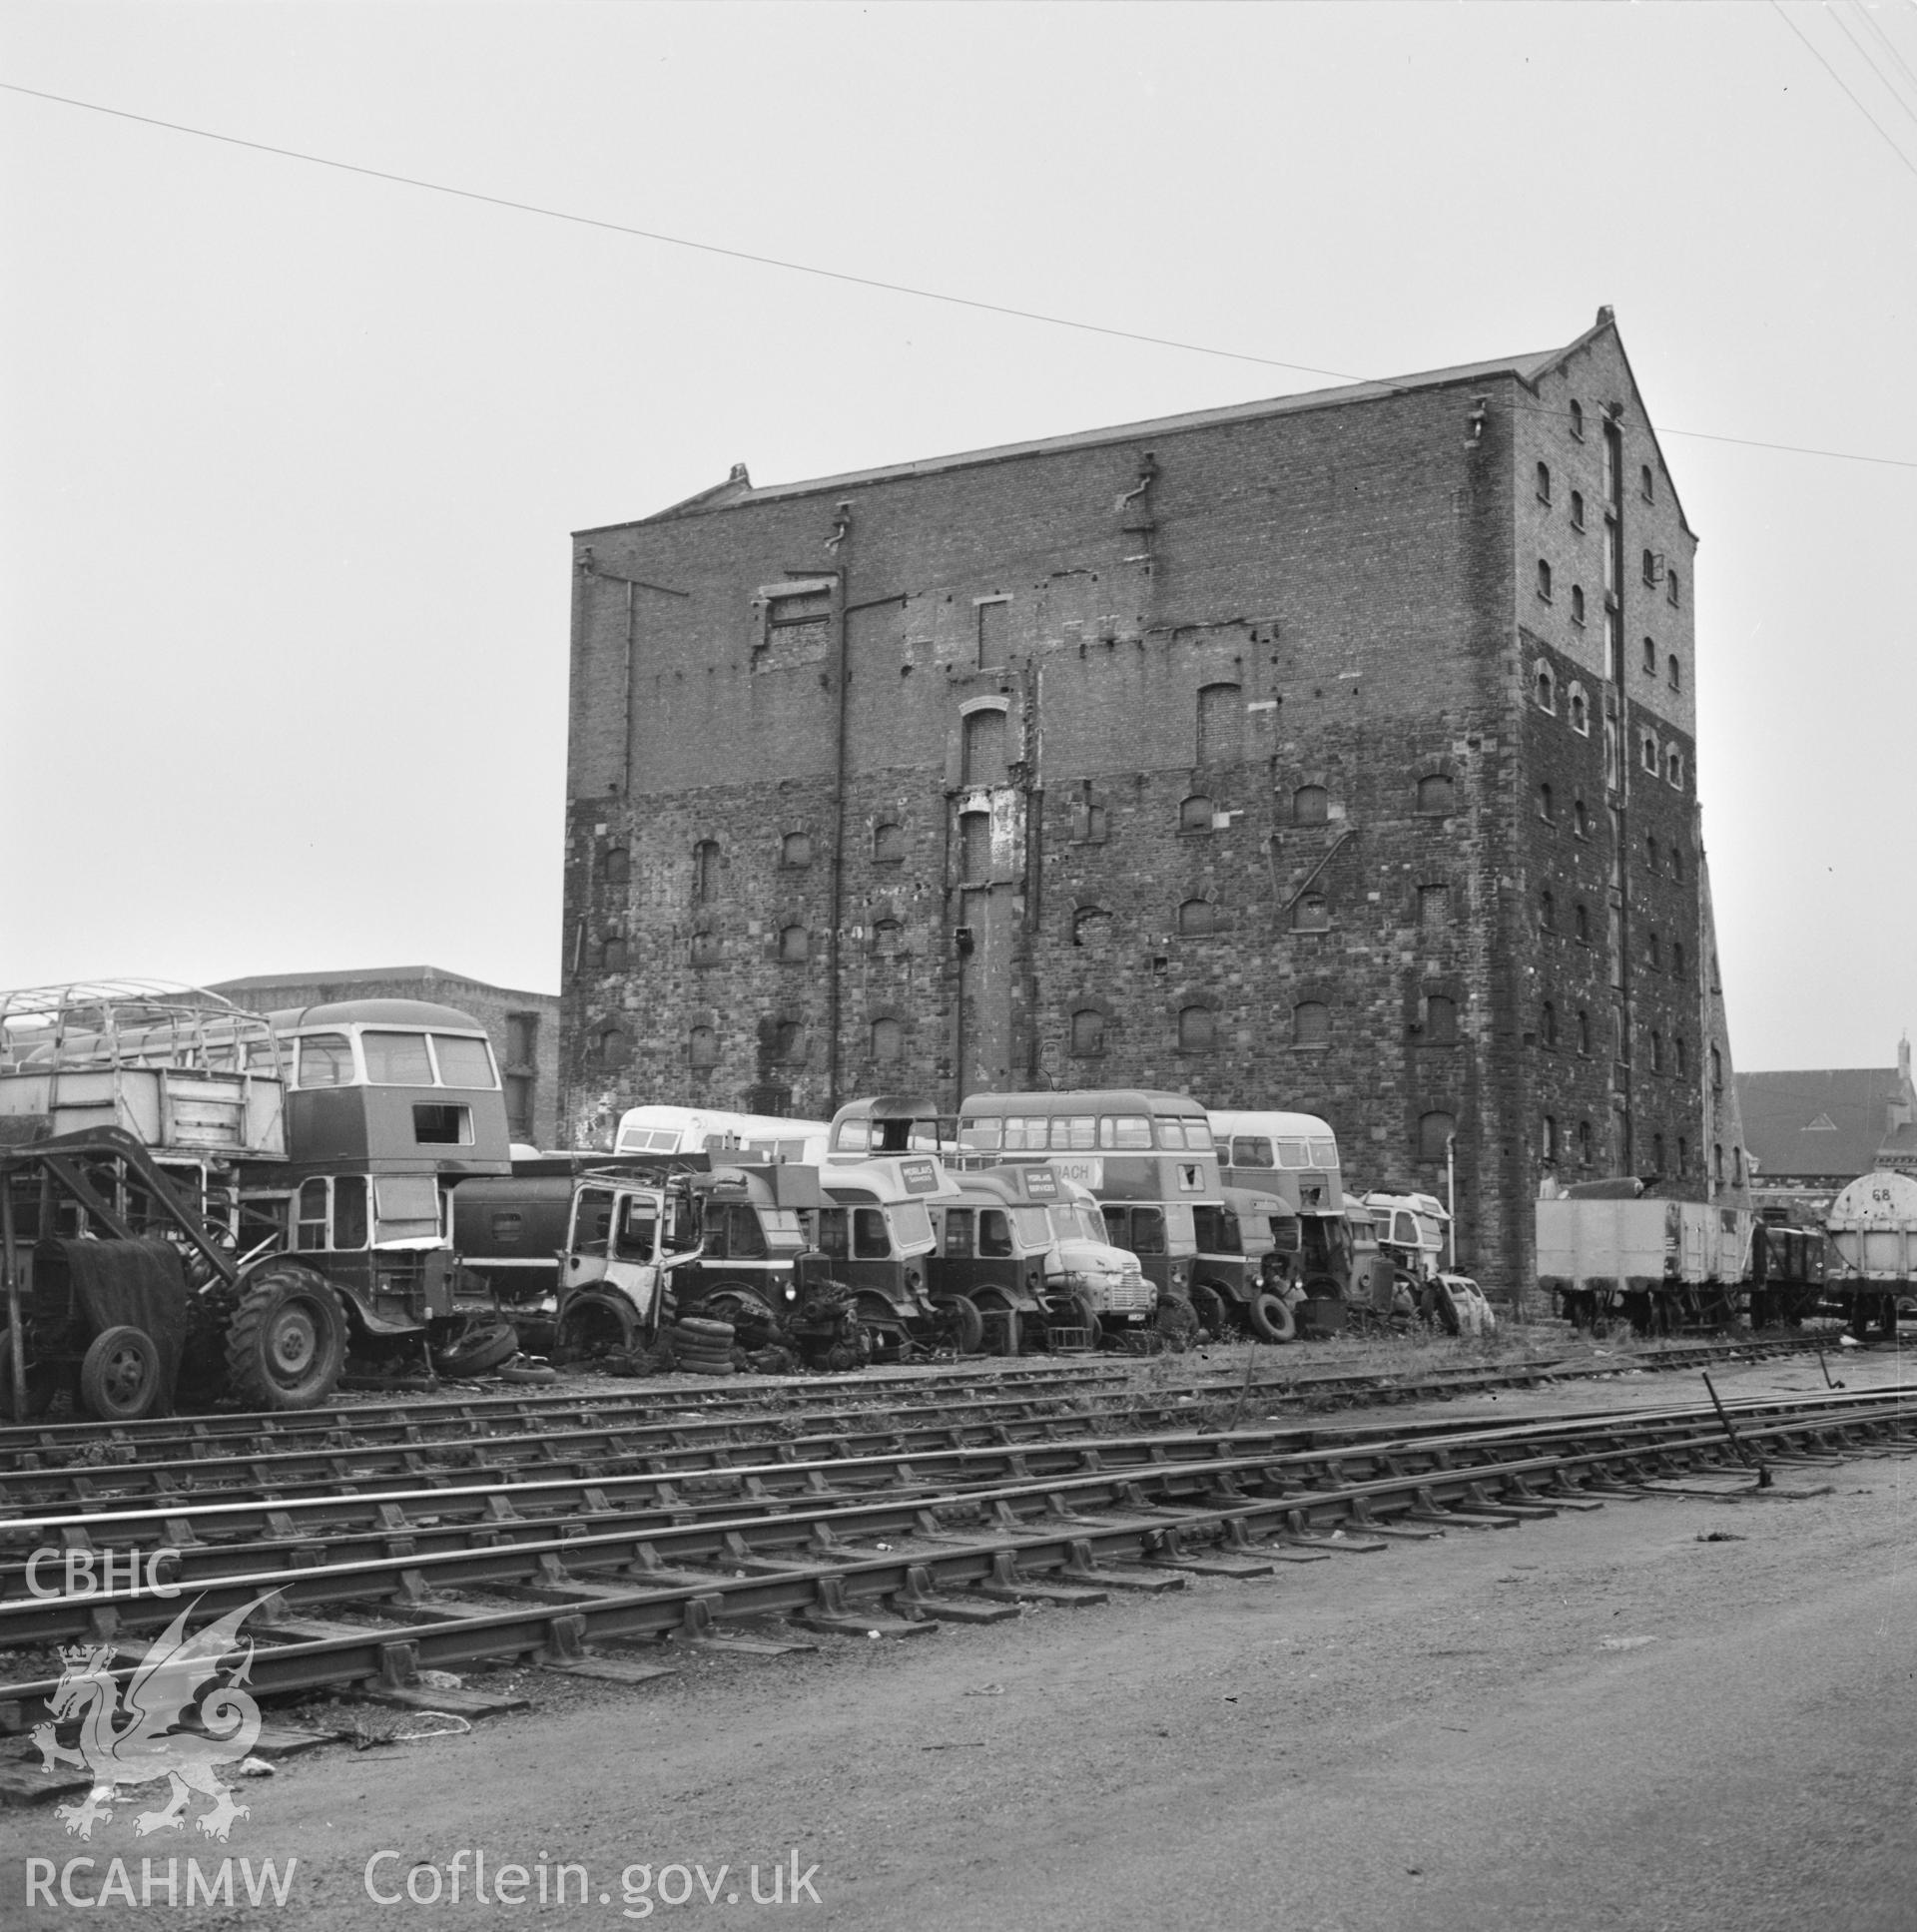 Digital copy of a black and white negative showing warehouse in Bute East Basin.